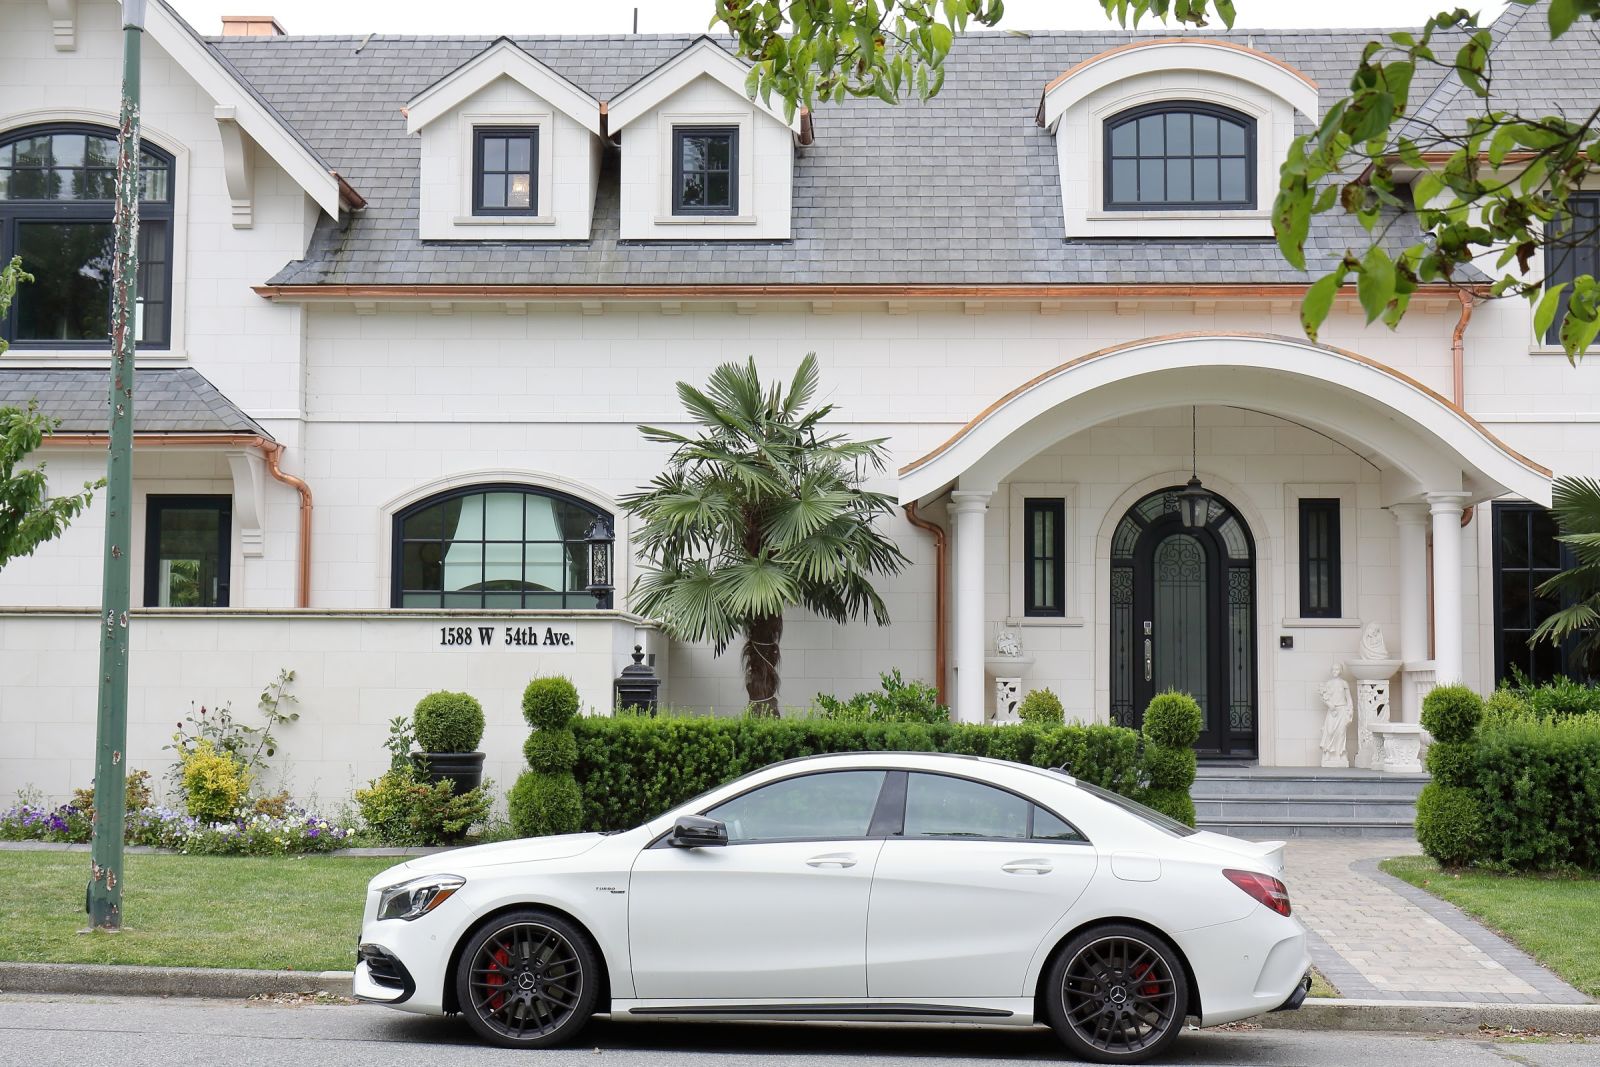 Normally a white Mercedes-AMG CLA 45 does not warrant a picture... there are probably more of them here than Toyota Camrys... the house it is parked in front of, though, is assessed by the city to be worth $11,483,000